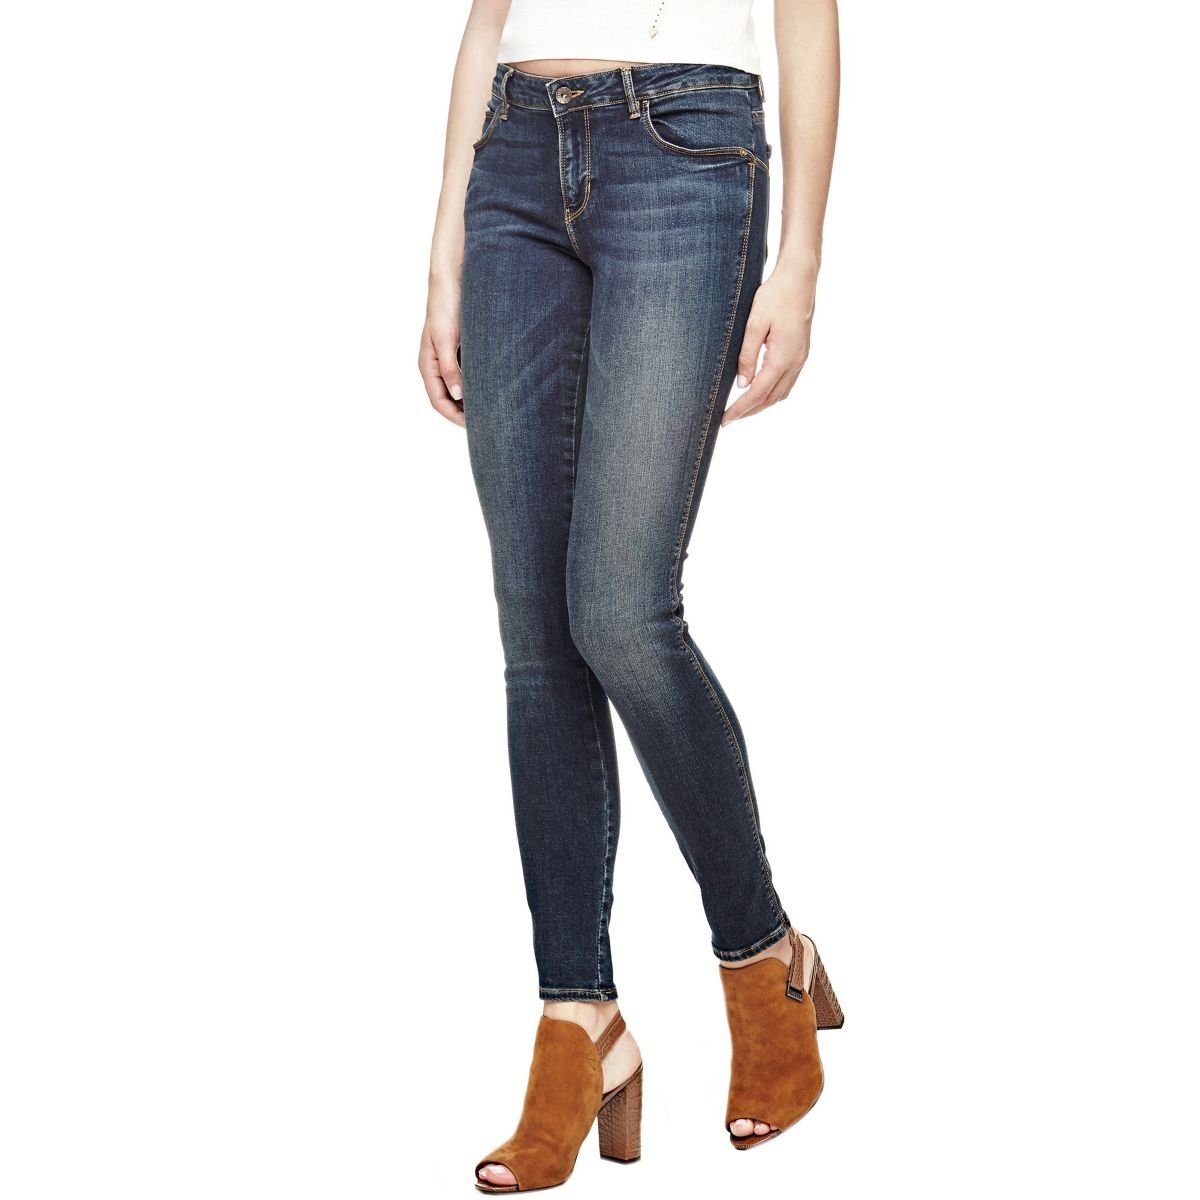 Otto - GUESS NU 15% KORTING: GUESS jeans CURVE X